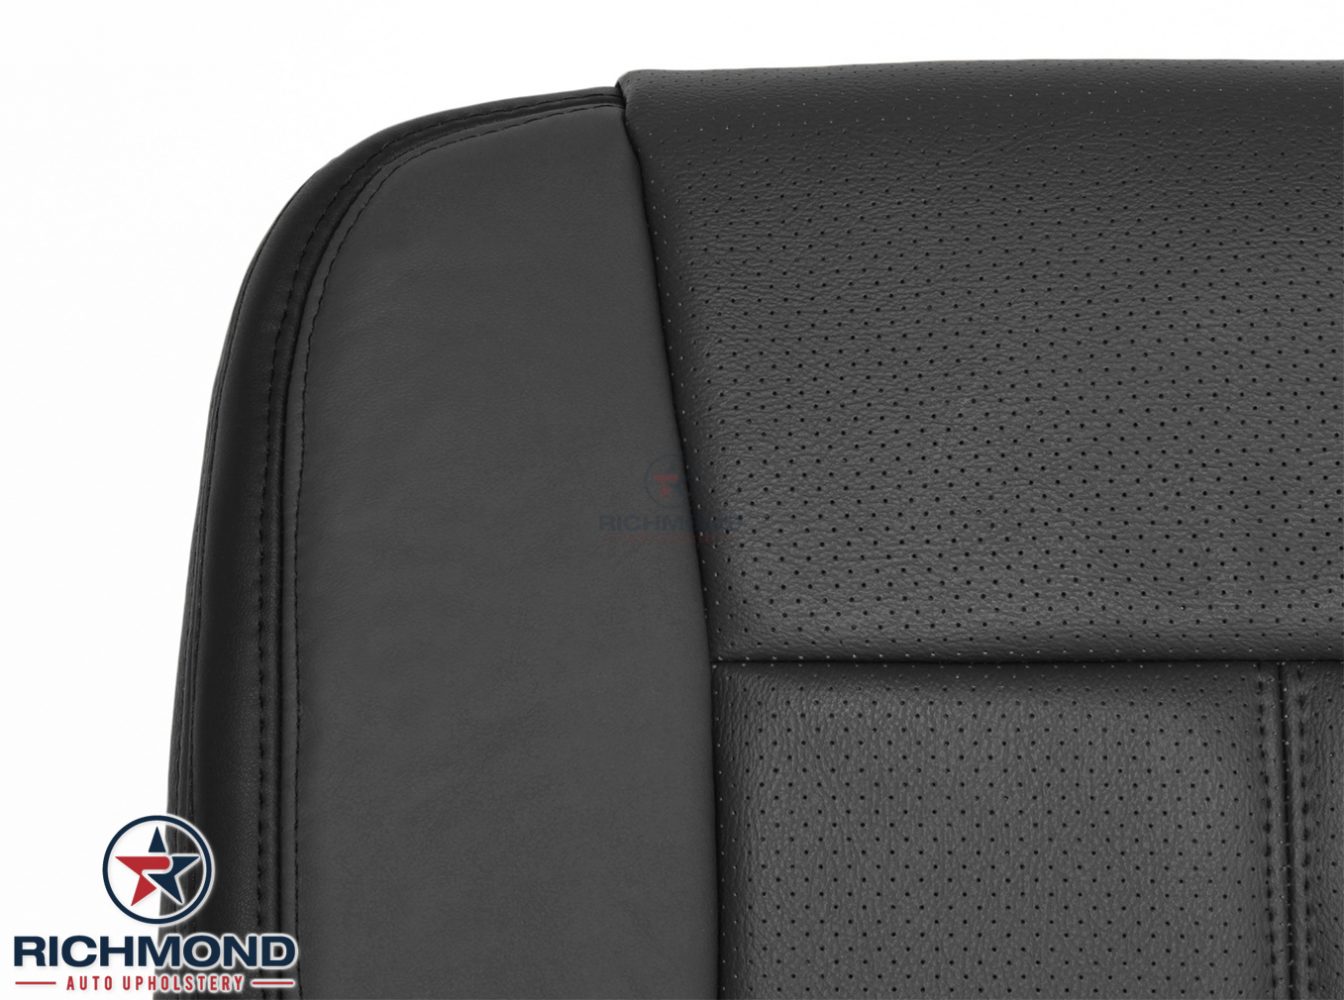 Compatible with 2013-2016 Ford F250 & F350 Platinum Edition Driver Side Bottom Replacement Leather Perforated Seat Cover Richmond Auto Upholstery Charcoal Black Black 